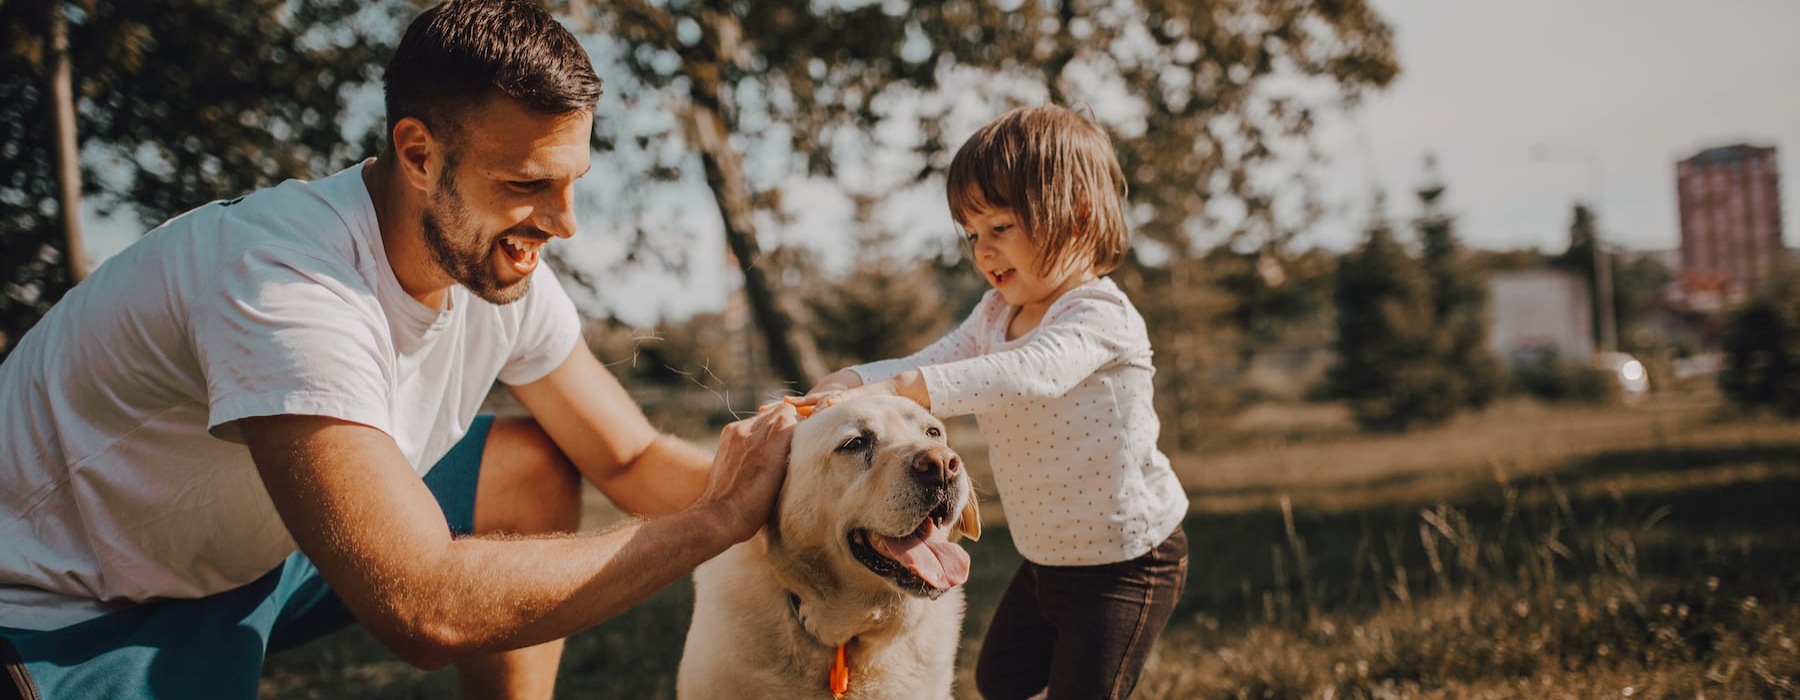 lifestyle image of a man and a child playing with a dog outside